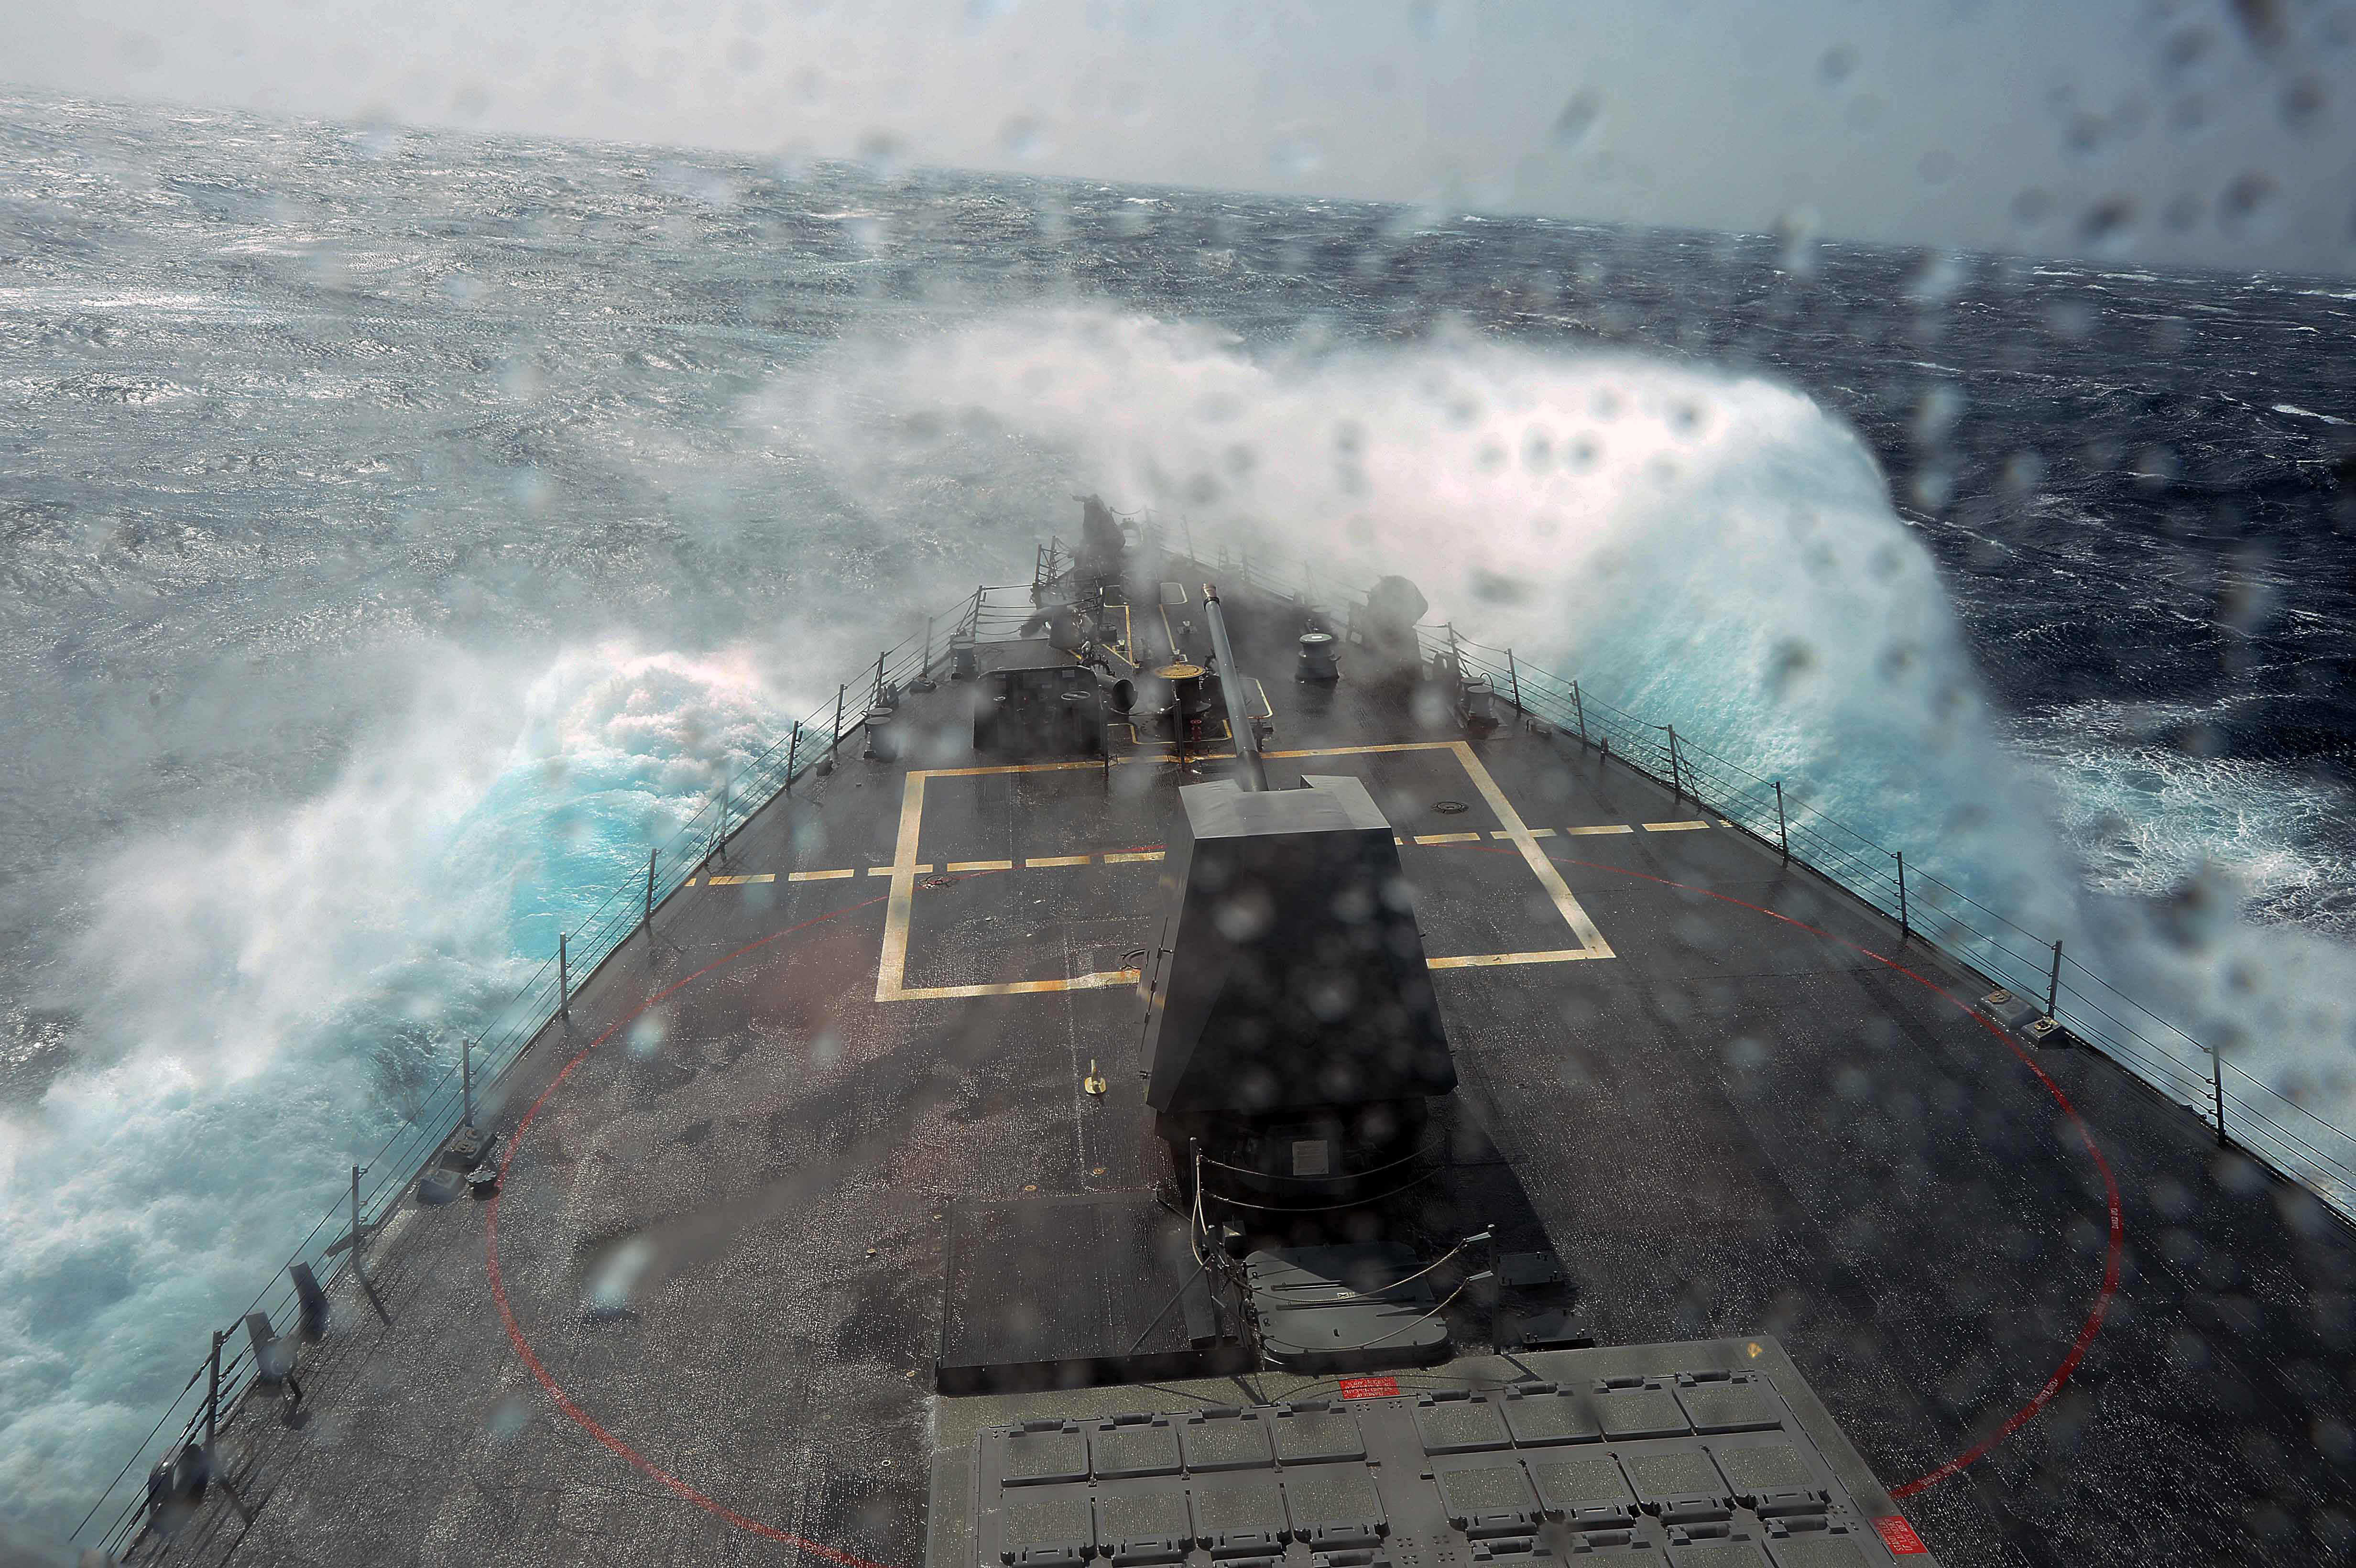 USS McCampbell transits the Pacific Ocean.